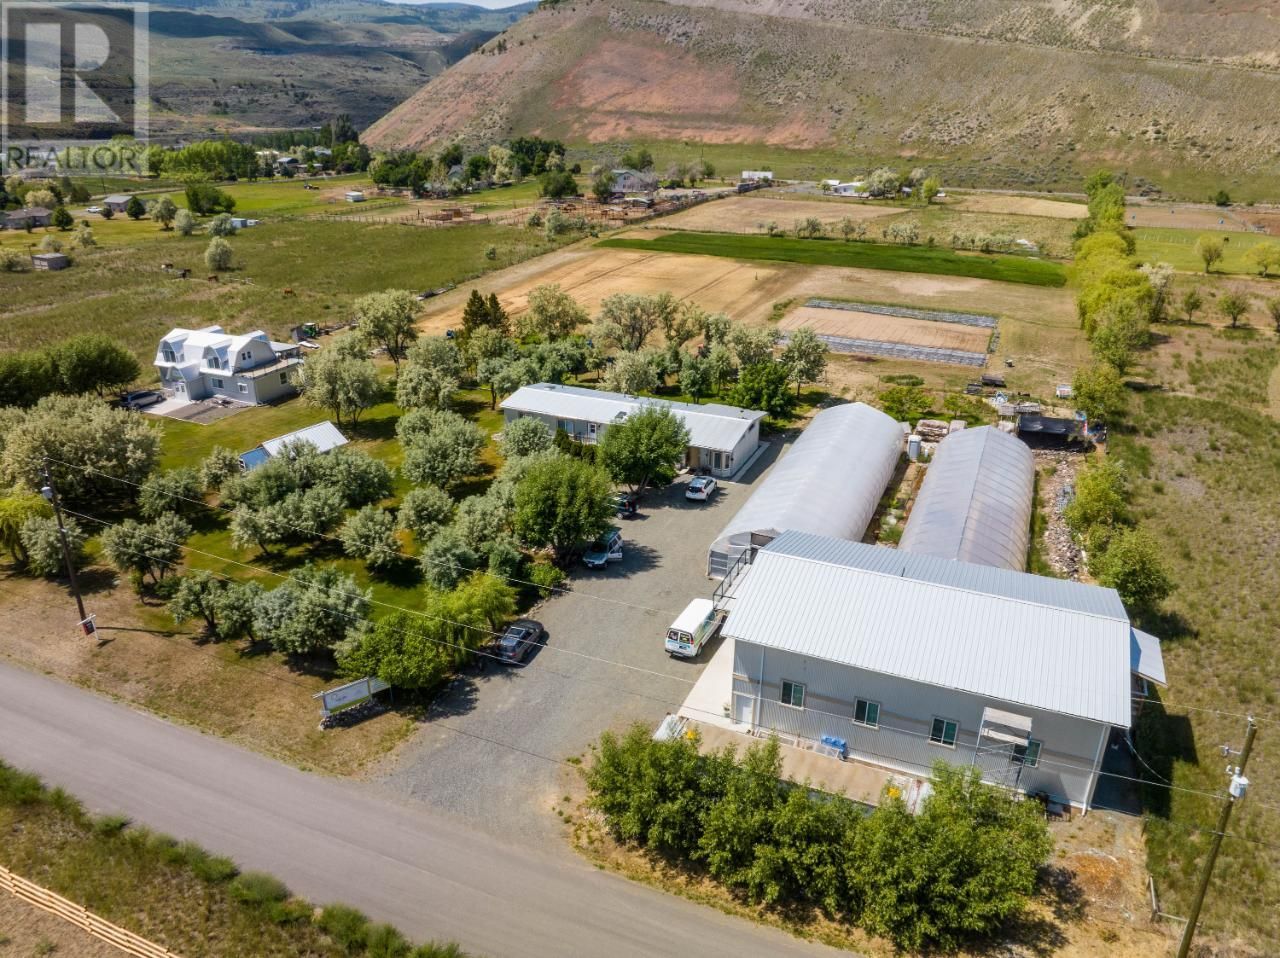 Main Photo: 6949 THOMPSON RIVER DRIVE in Kamloops: Agriculture for sale : MLS®# 172204